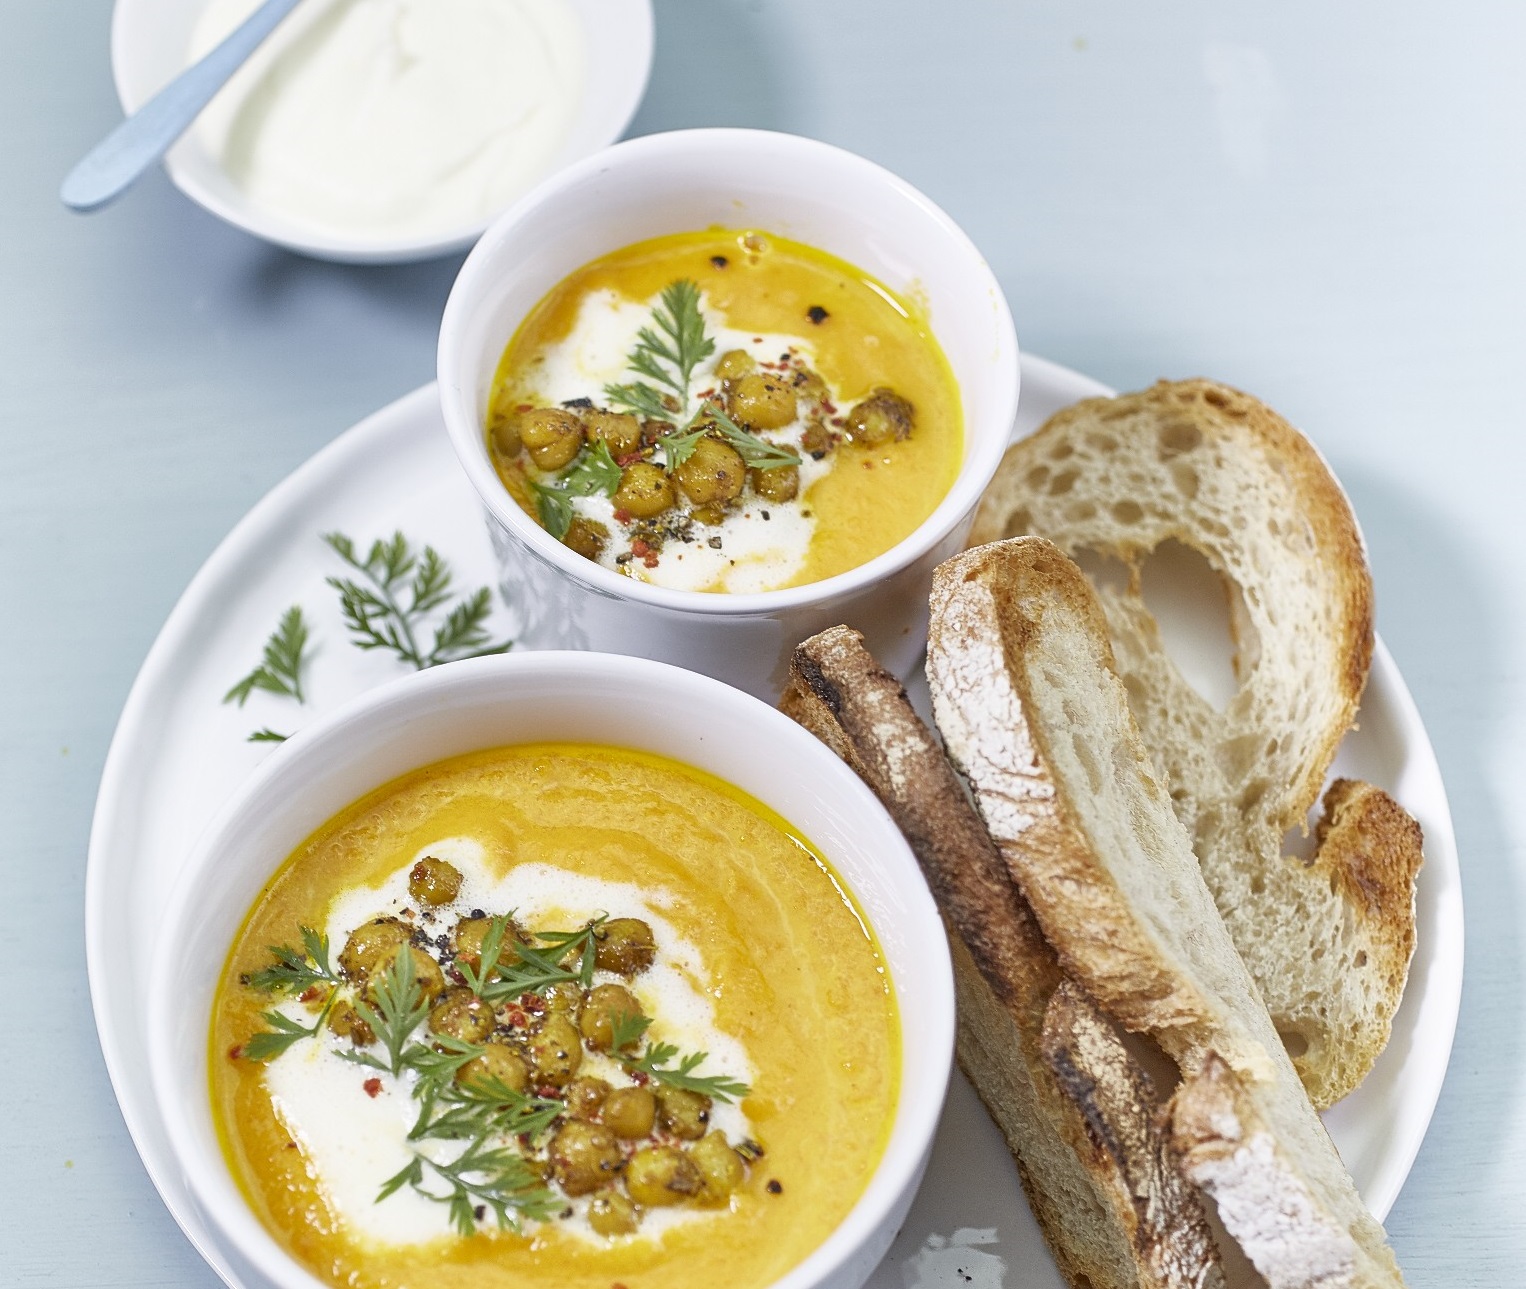 Carrot soup with roasted chickpeas